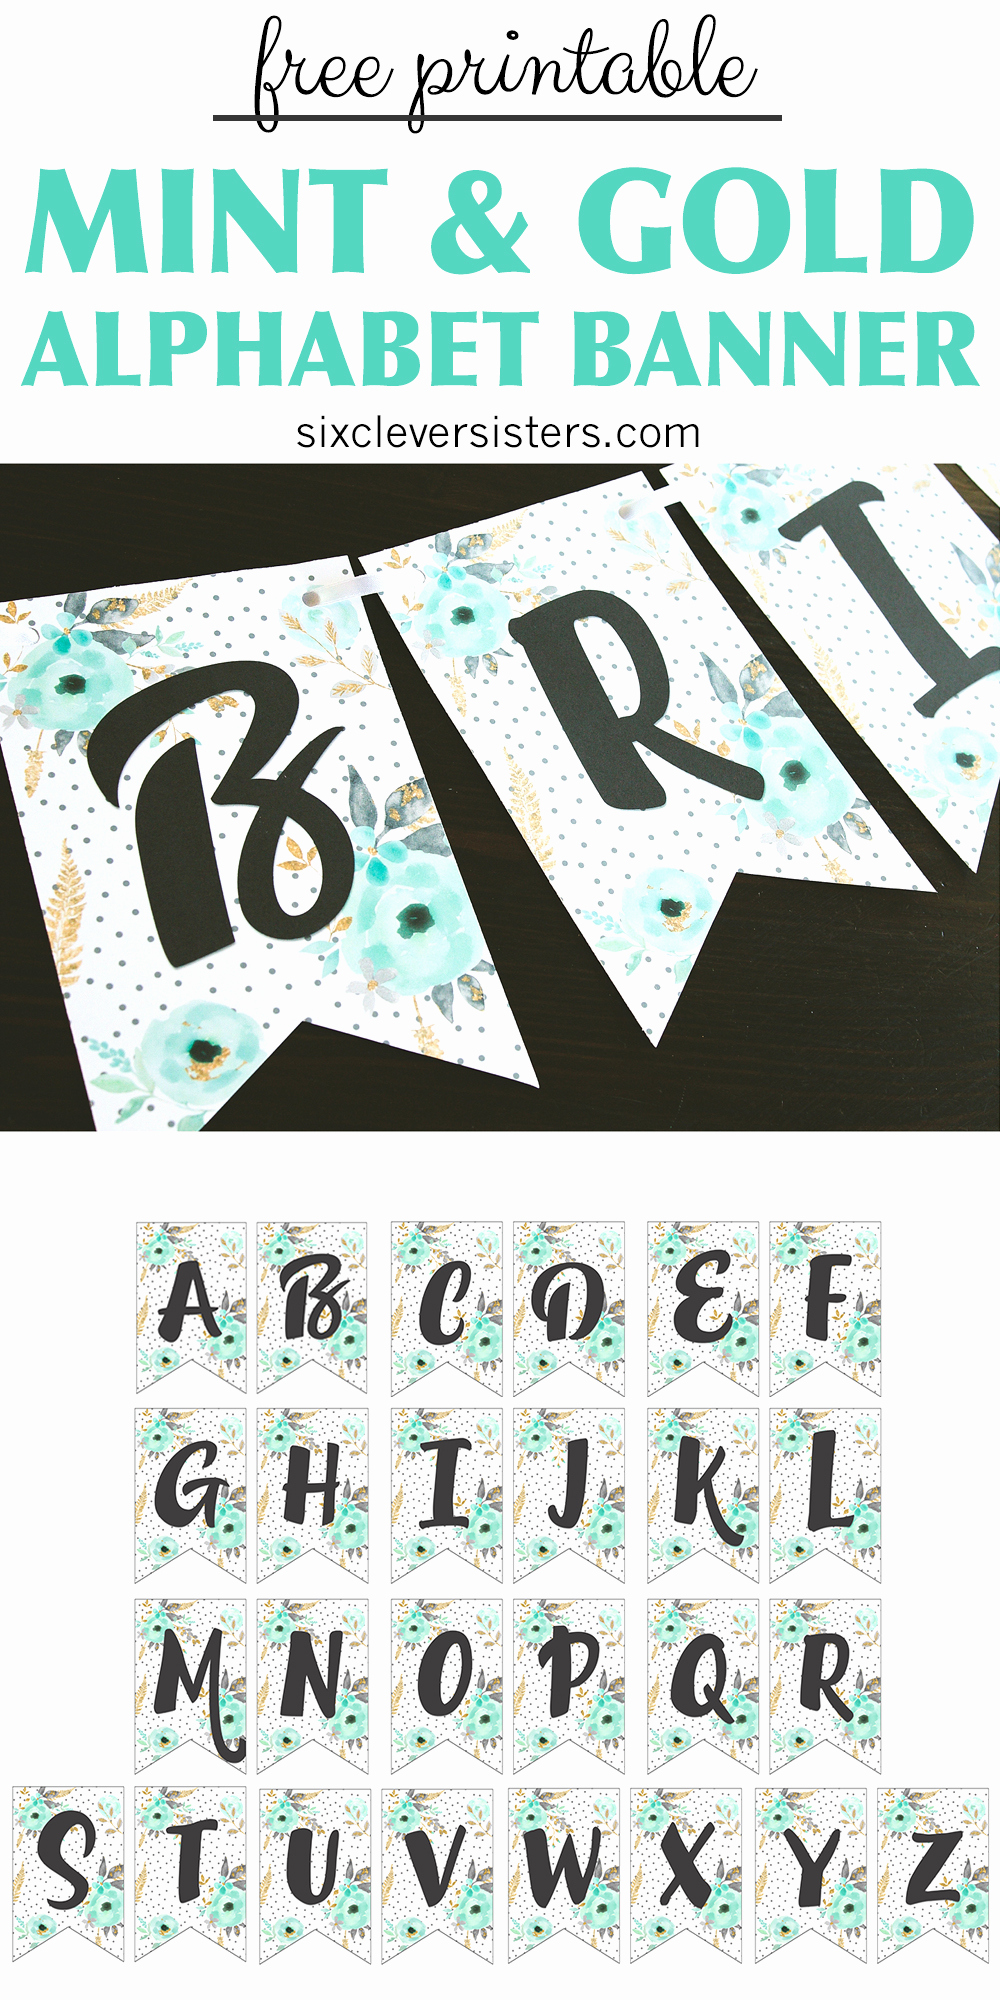 Free Printable Banner Letters Awesome Free Printable Alphabet Banner Mint&amp; Gold Six Clever